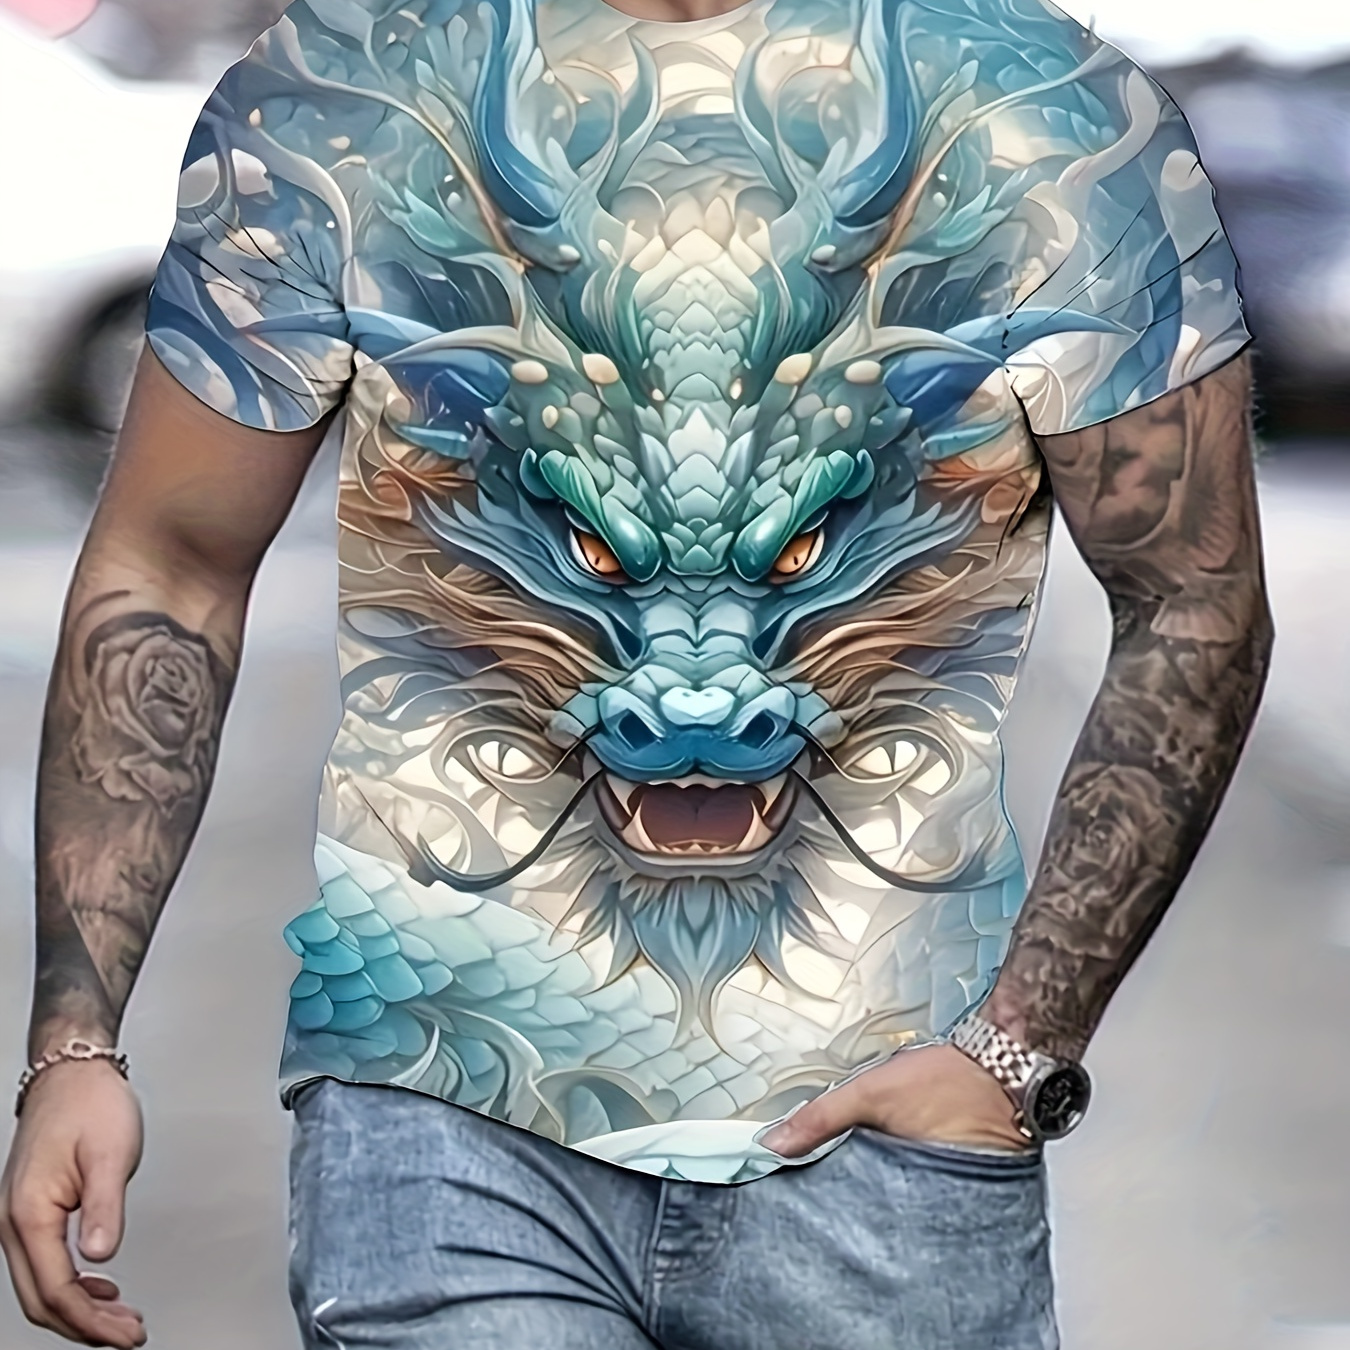 

Novelty Chinese Dragon 3d Printed Crew Neck Short Sleeve T-shirt For Men, Casual Summer T-shirt For Daily Wear And Vacation Resorts